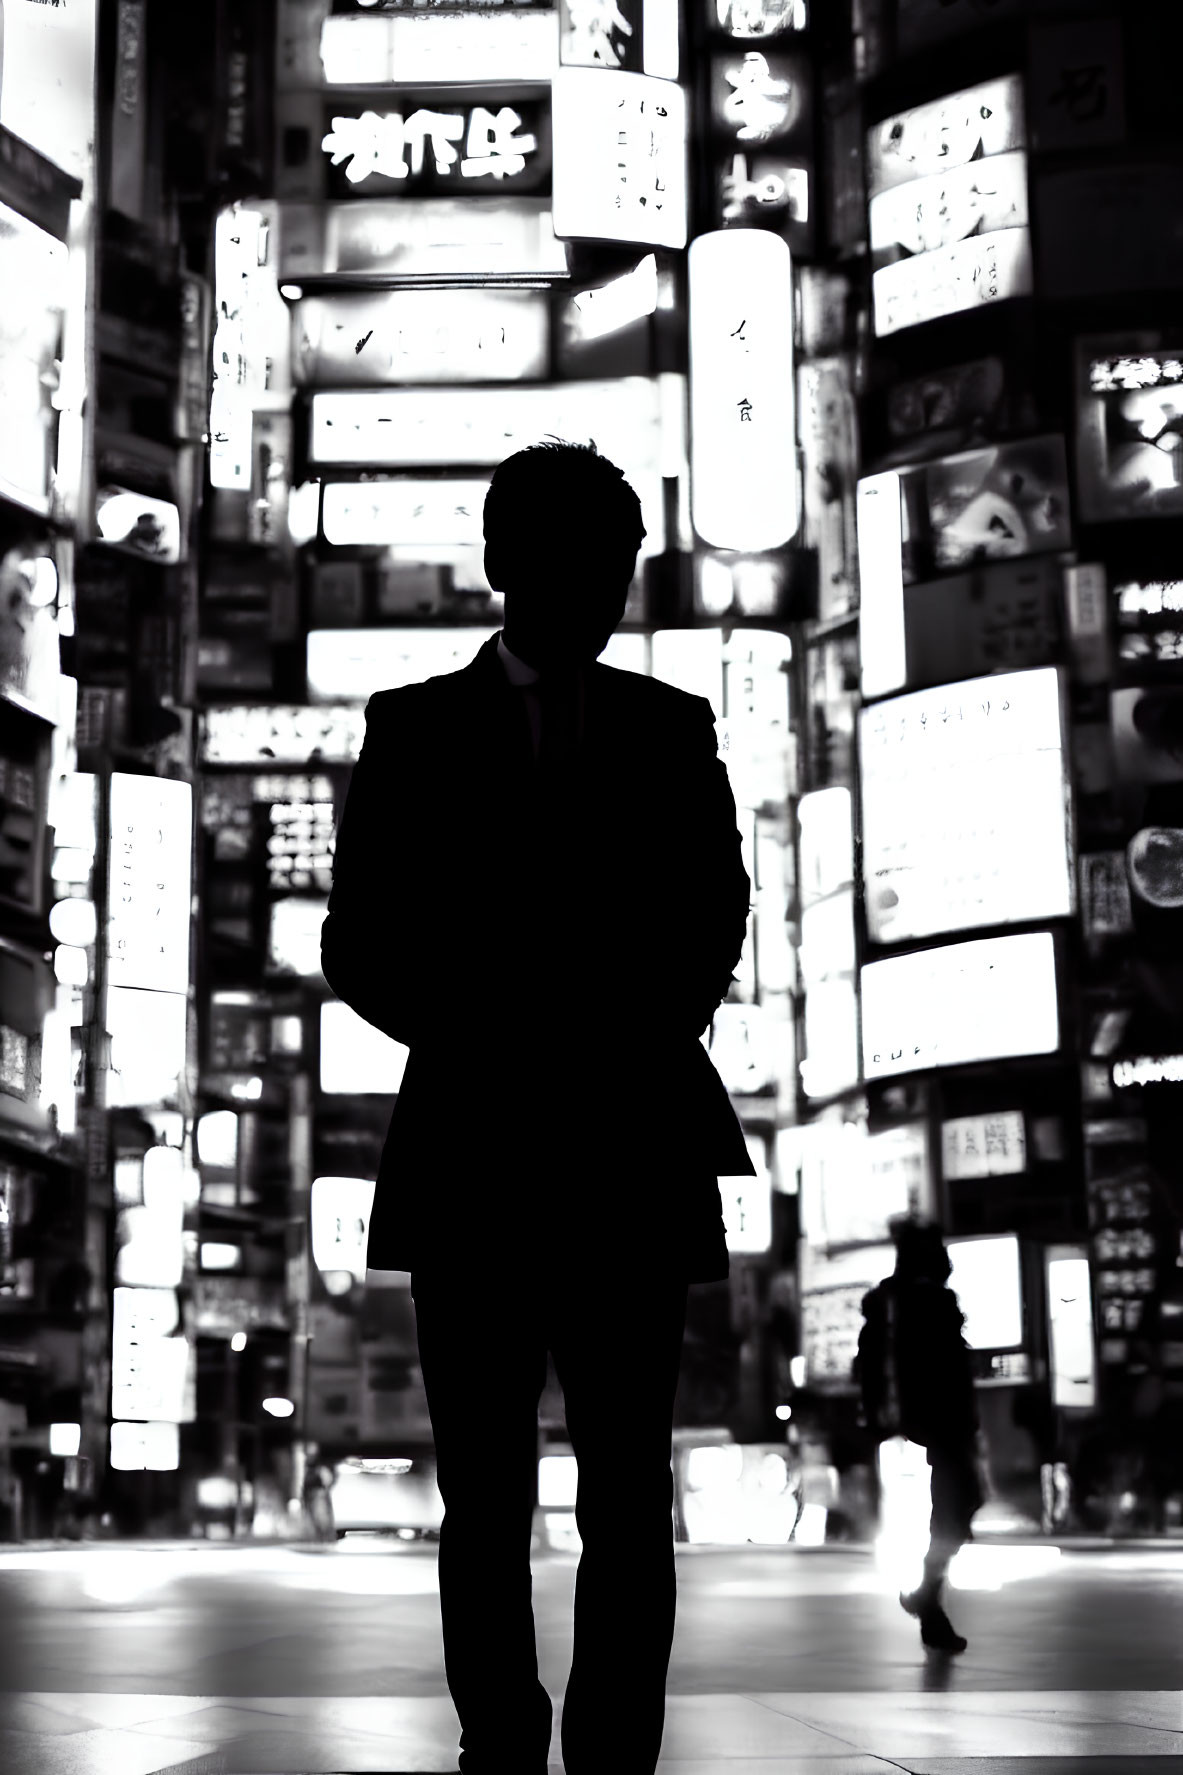 Silhouetted figure against neon-lit cityscape at night